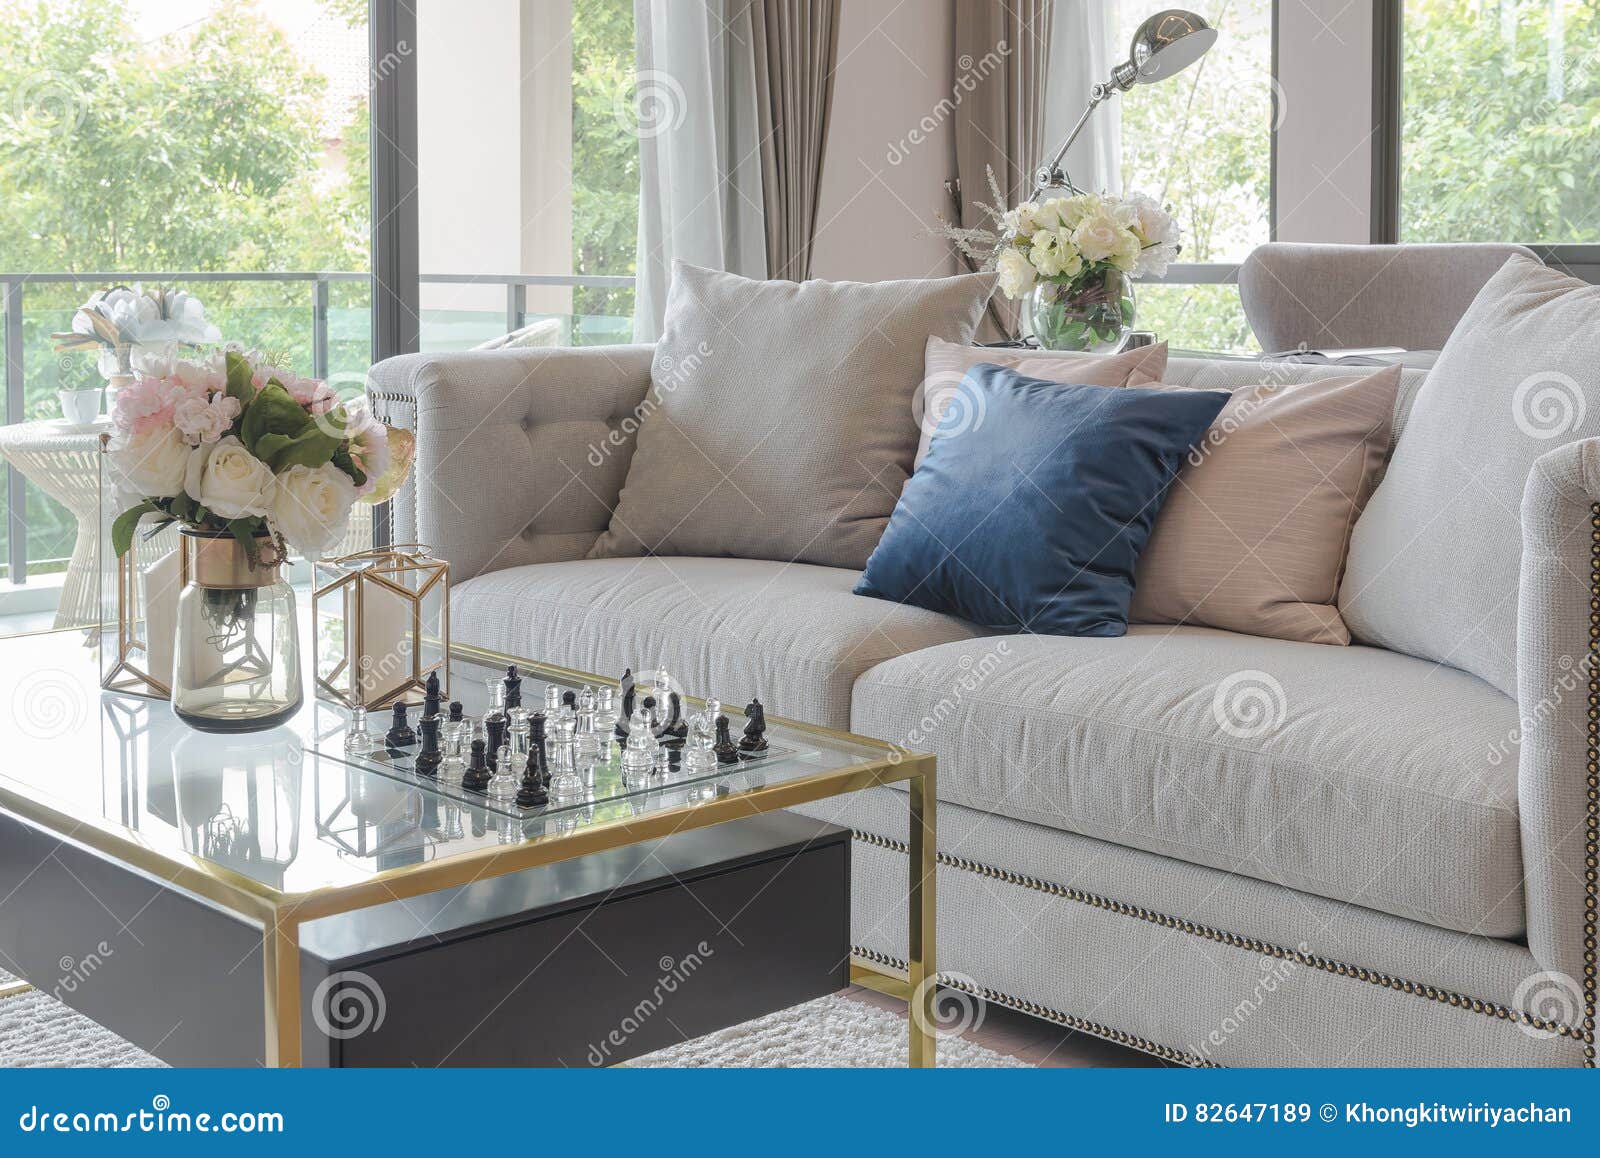 Luxury Living Room With Elegant Sofa And Set Of Pillows Stock Image - Image  Of Comfortable, Curtain: 82647189